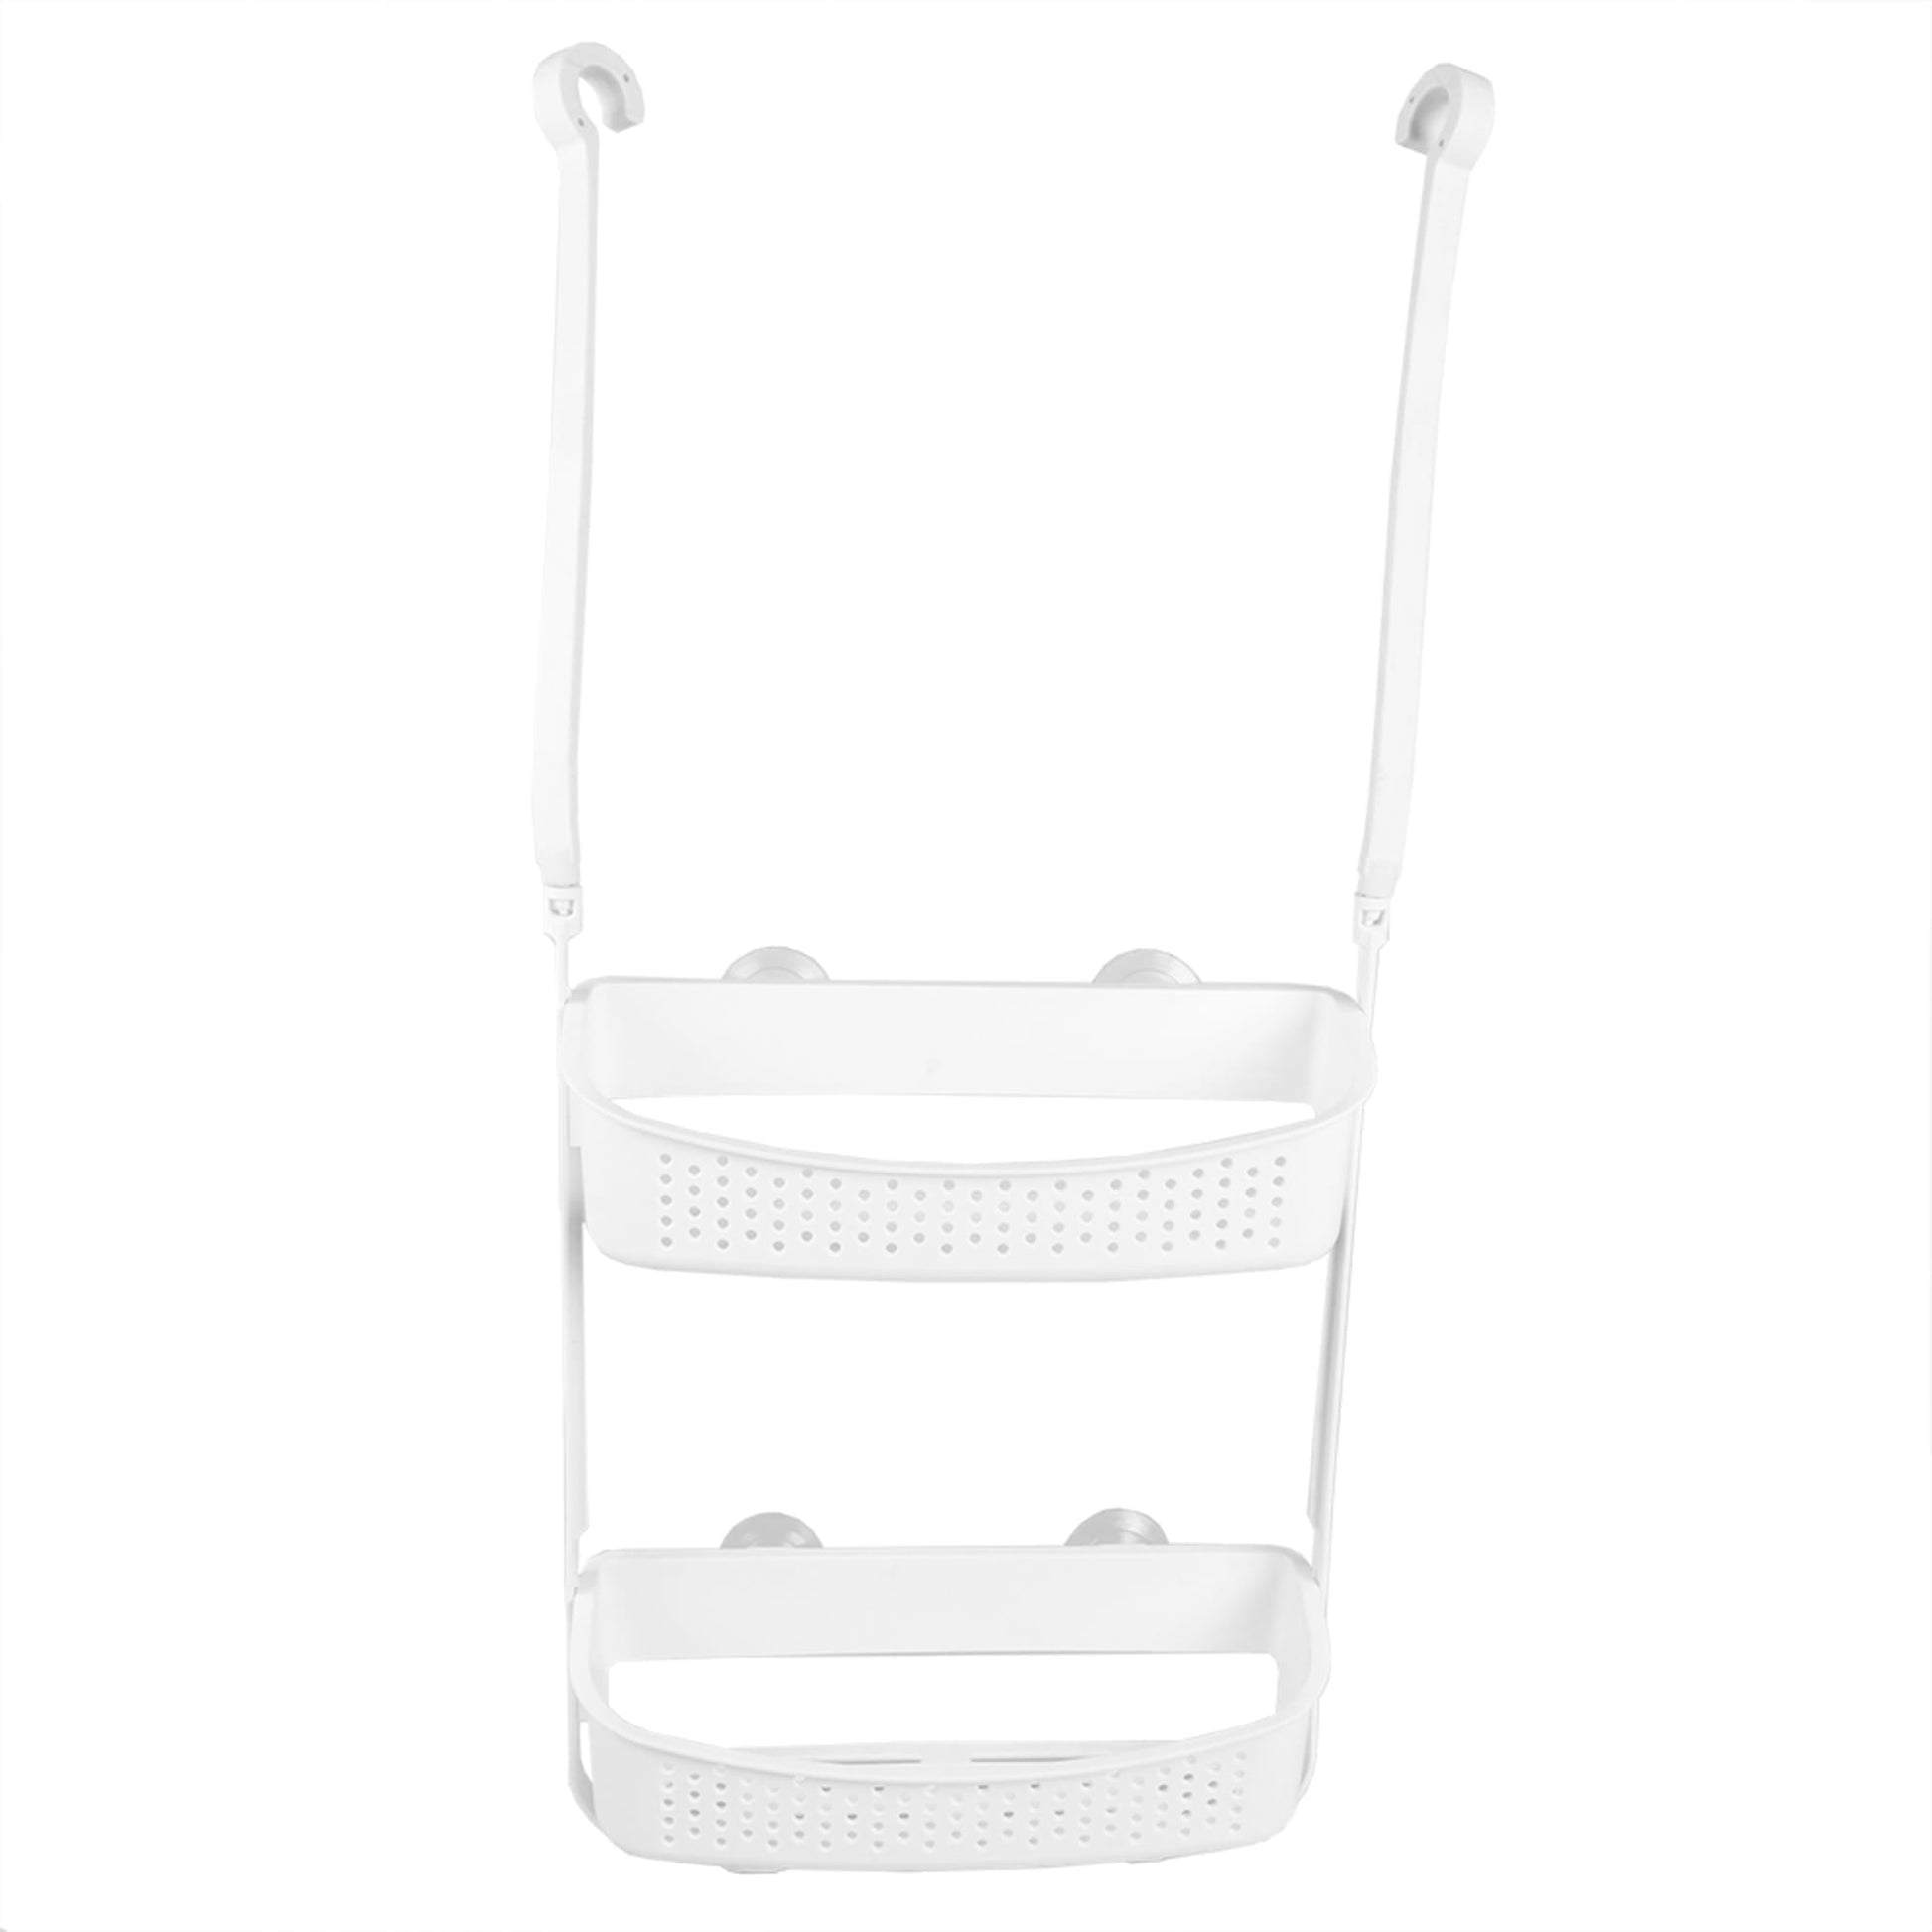 2 Tier Perforated Plastic Shower Caddy with Suction Cups, White